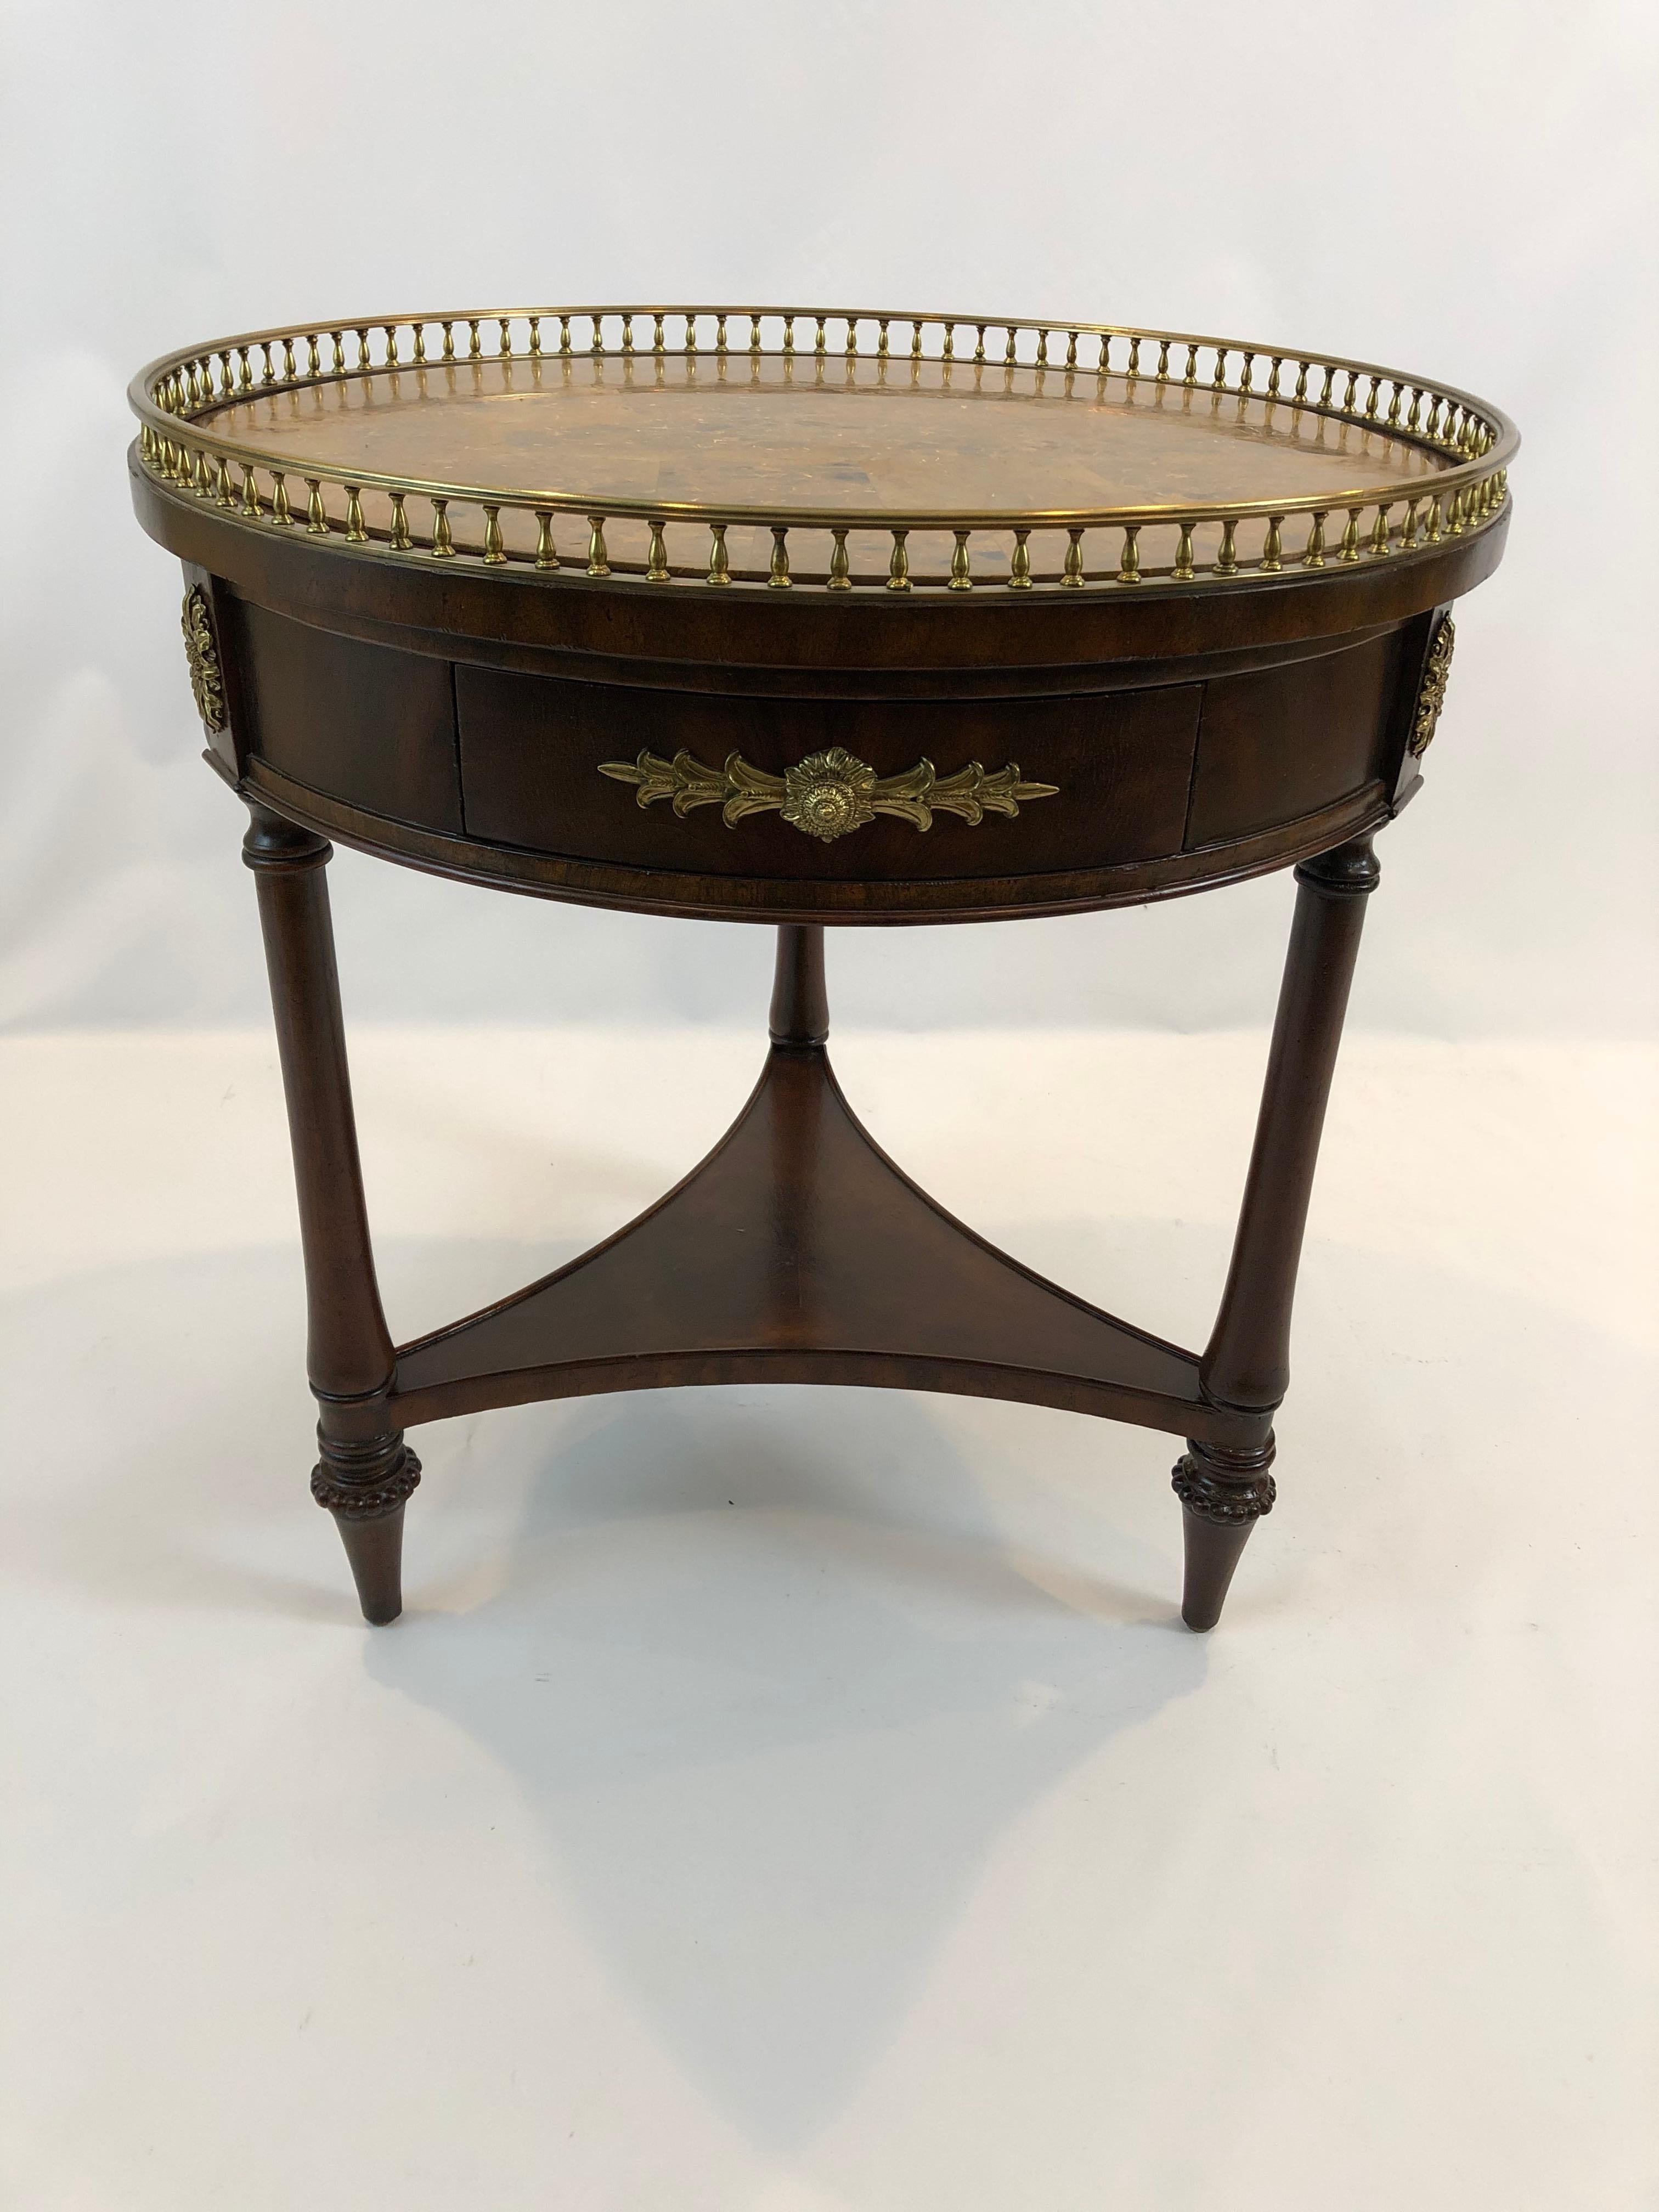 Stunning round mahogany side table by Maitland Smith having handsome caramel faux marble top with lovely brass gallery and 3 drawers around the periphery and beautiful ornate brass hardware. There are other beautiful details such as brass mounts on